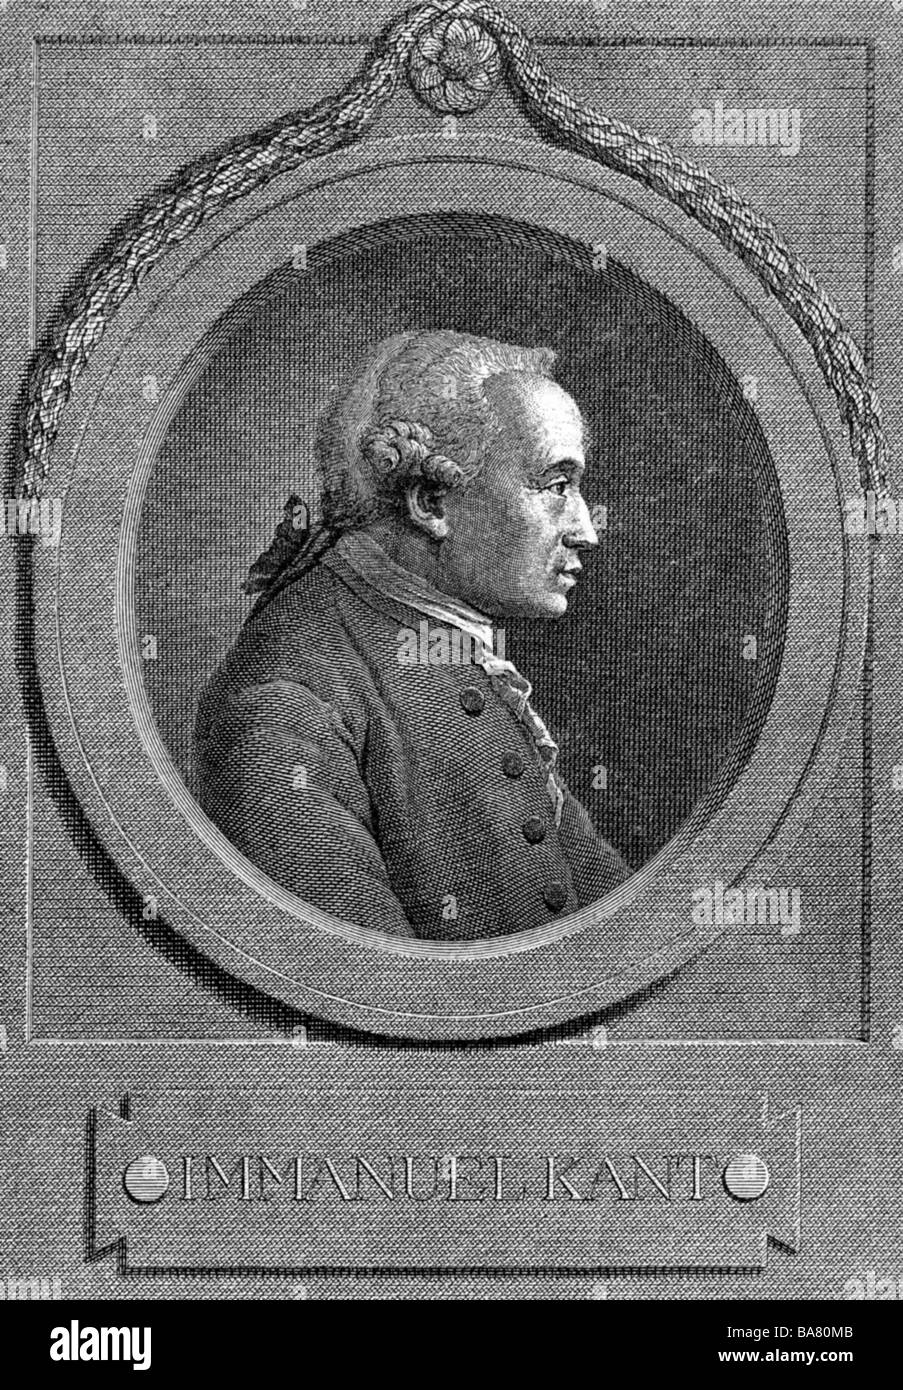 Kant, Immanuel, 22.4.1724 - 12.2.1804, German philosopher, portrait, copper engraving, 1791, by Johann Friedrich Bause (1738-1814), after painting by Hans Schnorr von Carolsfeld, Artist's Copyright has not to be cleared Stock Photo